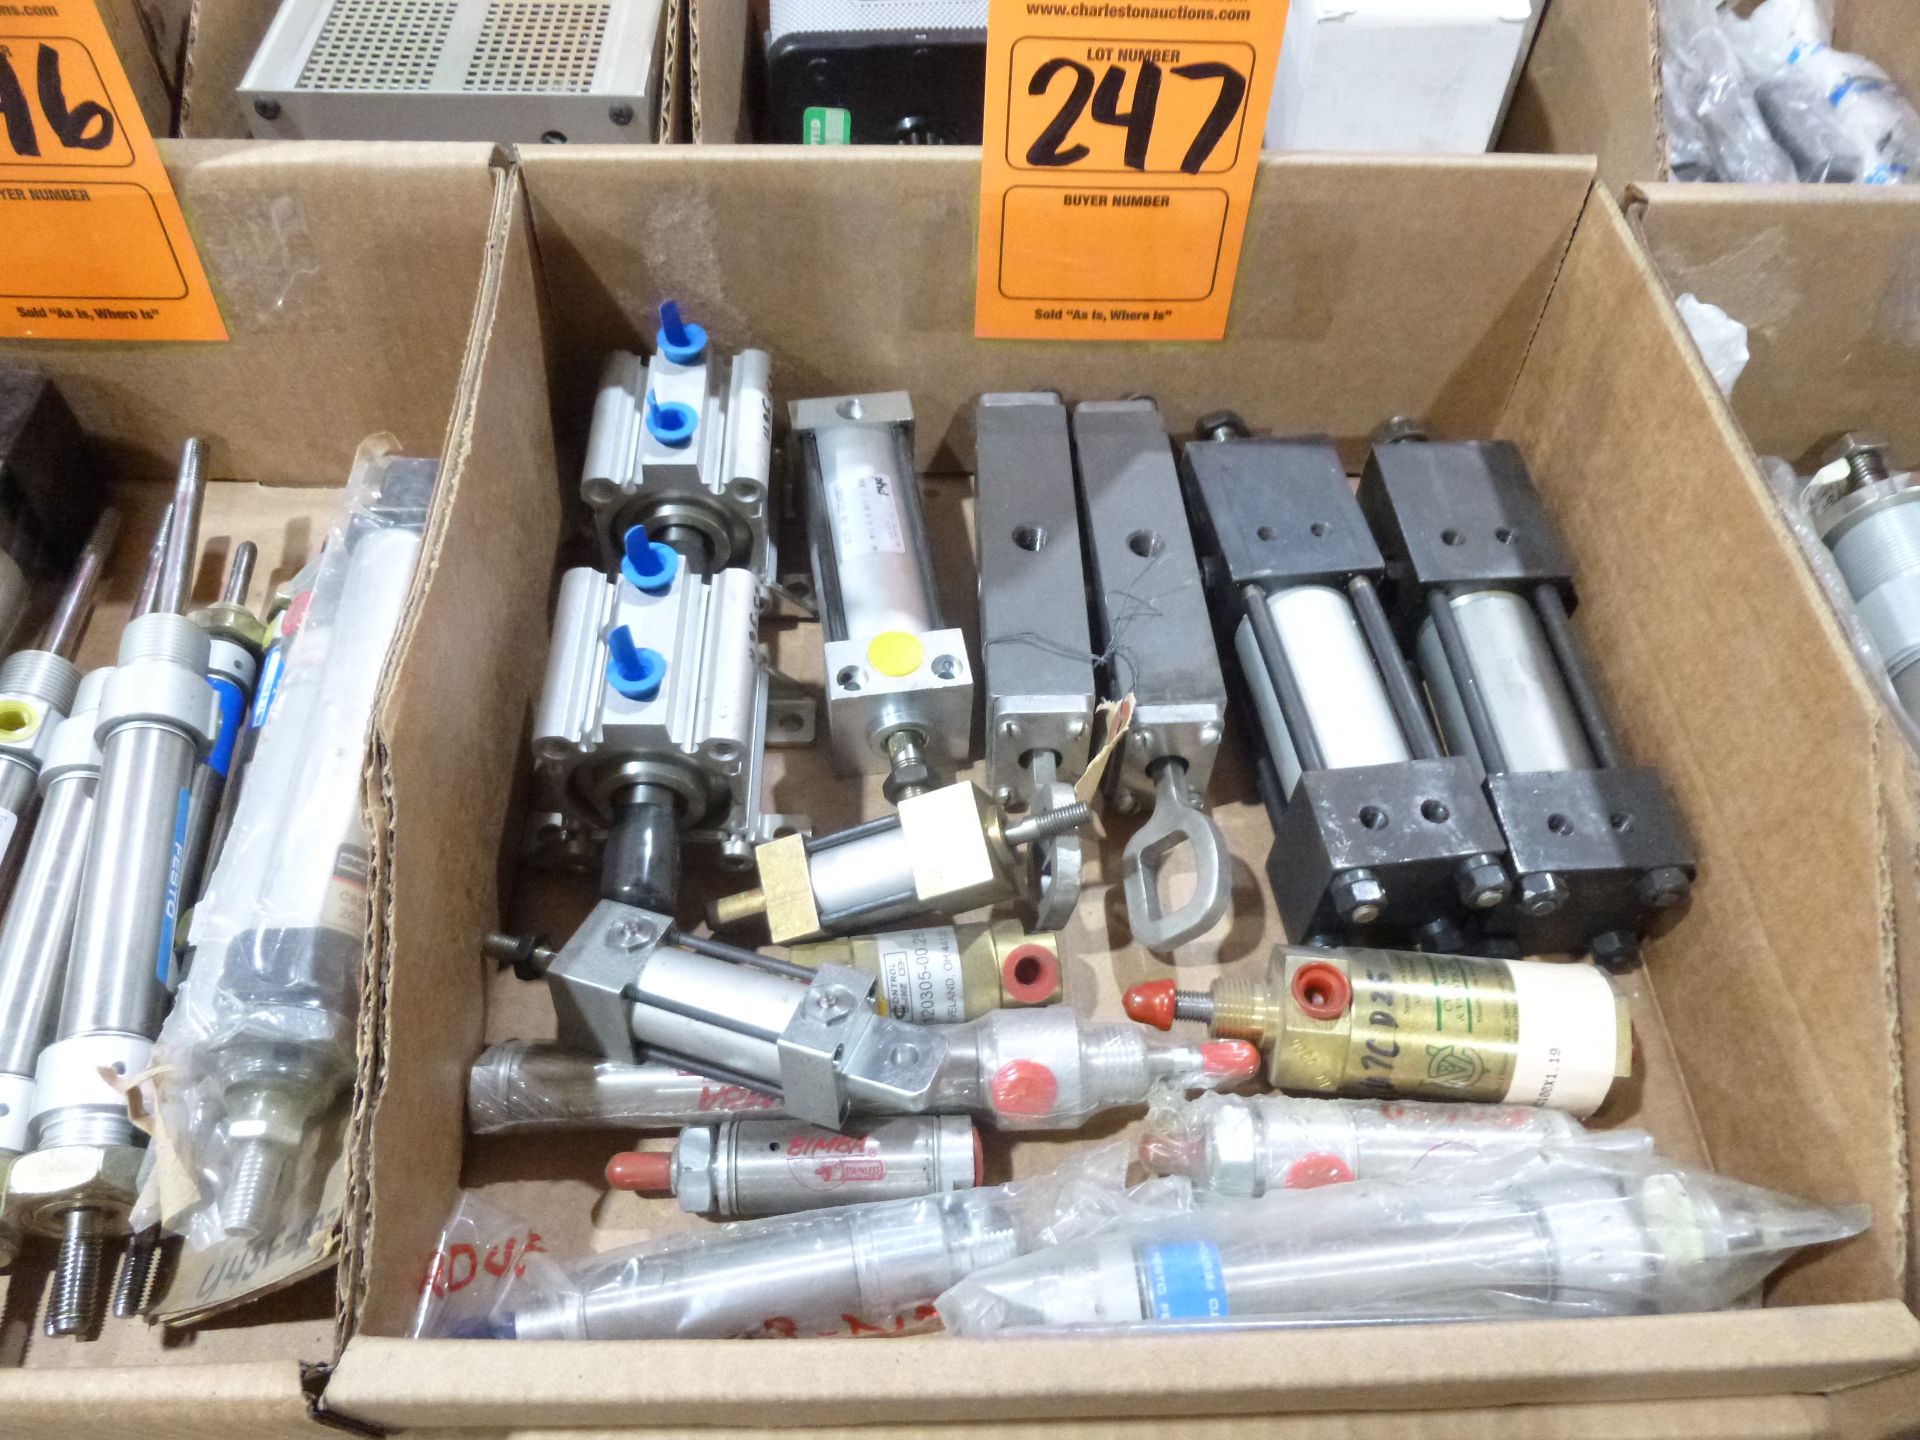 Large Qty of assorted pnuematic rams and actuators, most appear new, as always with Brolyn LLC